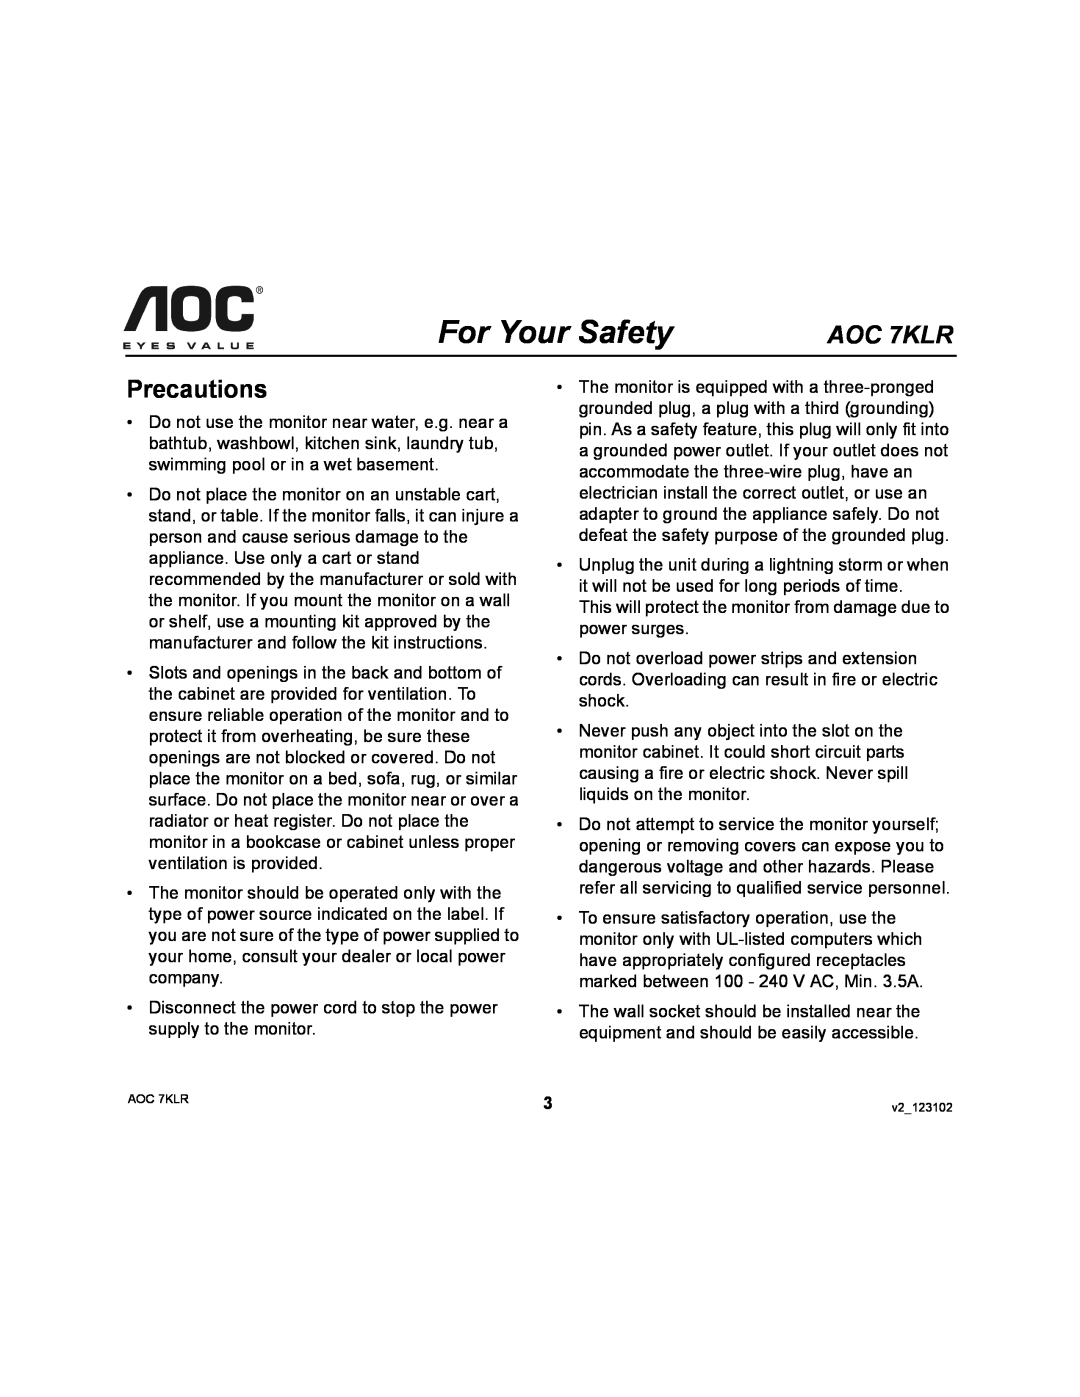 AOC user manual Precautions, For Your Safety, AOC 7KLR 